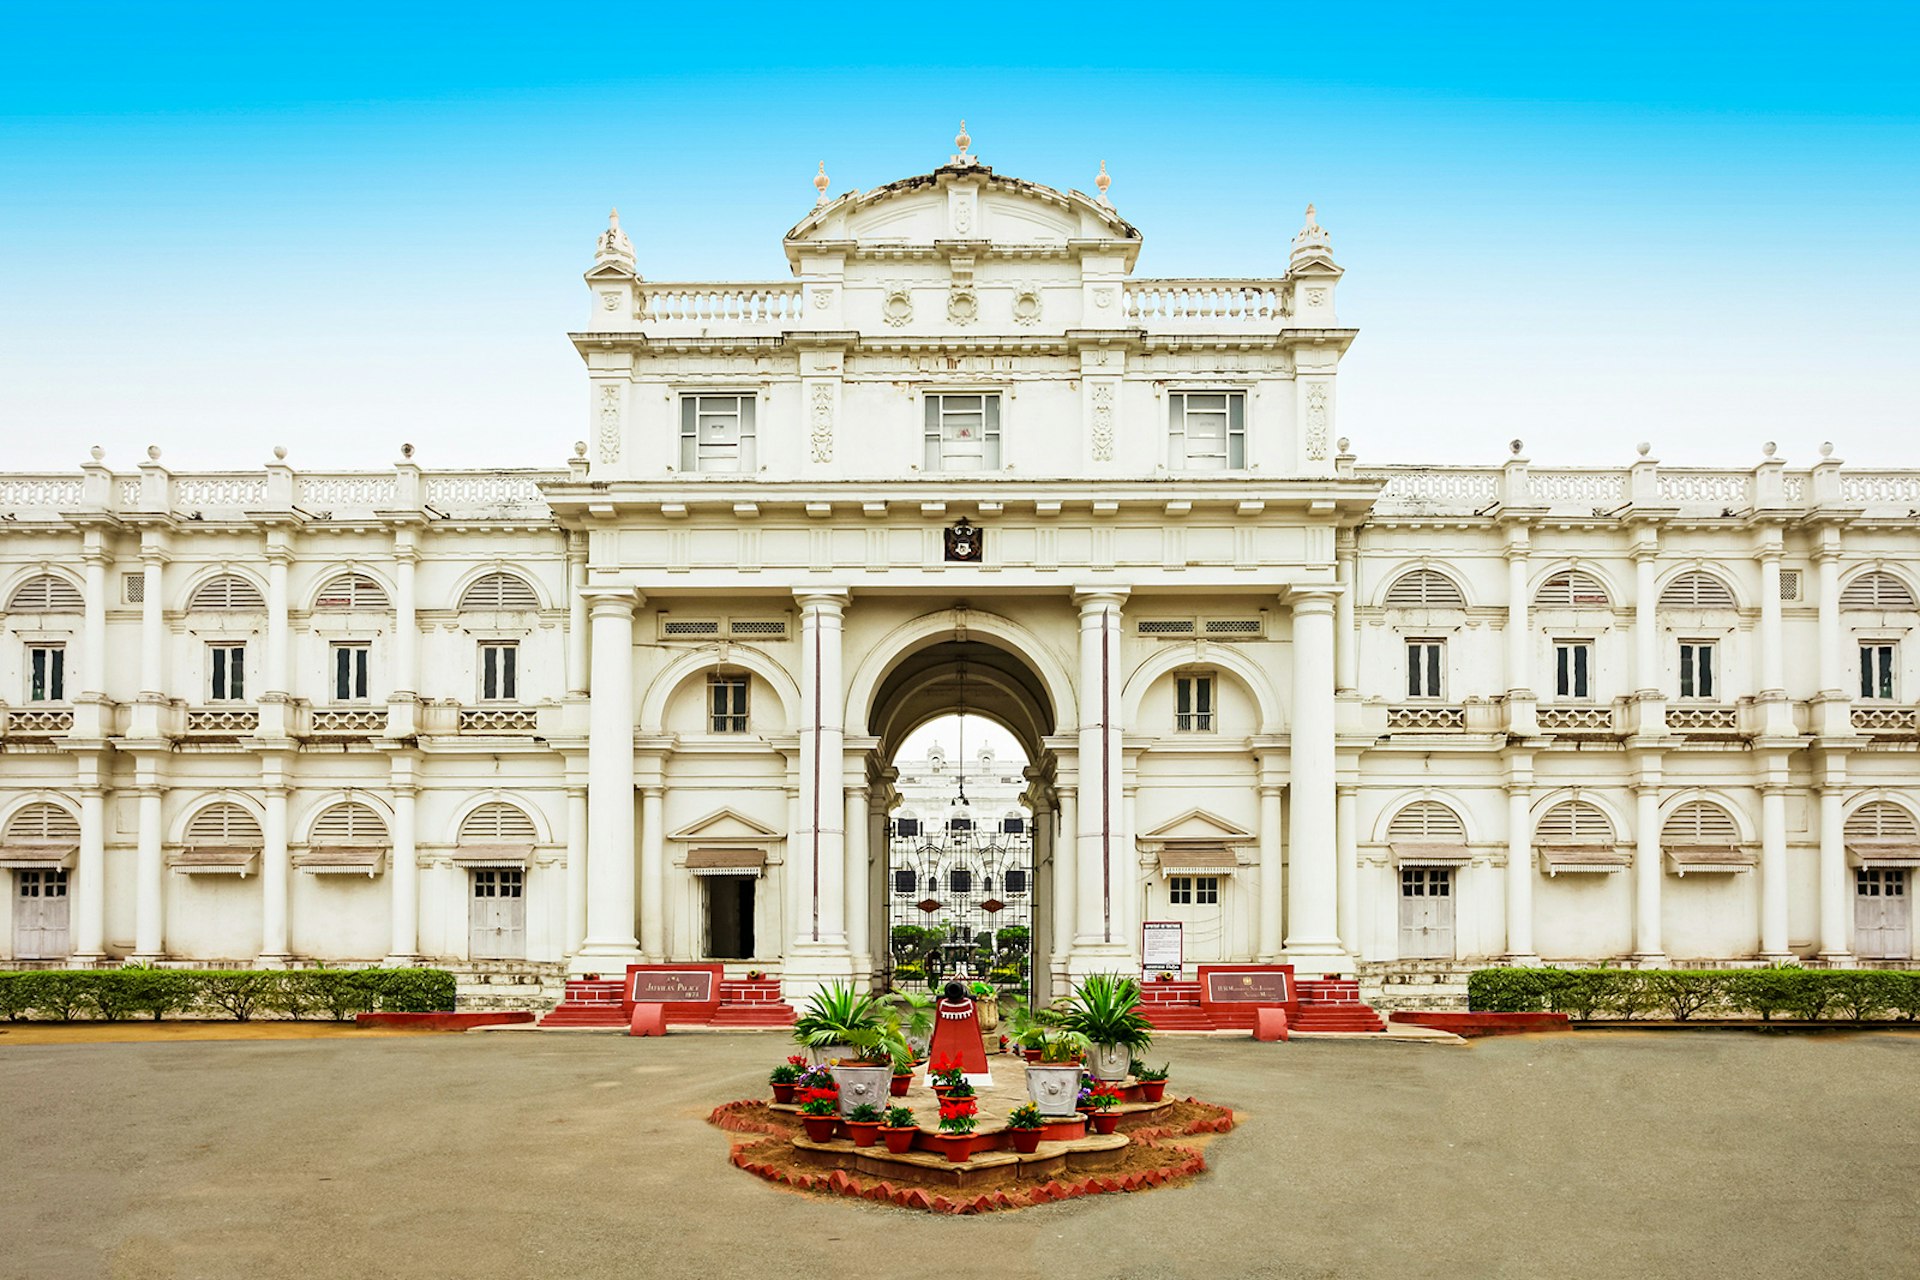 The entrance of the white Jai Vilas Palace; the exterior is covered in columns and arches, and a small garden sits in the foreground. Madhya Pradesh, India.